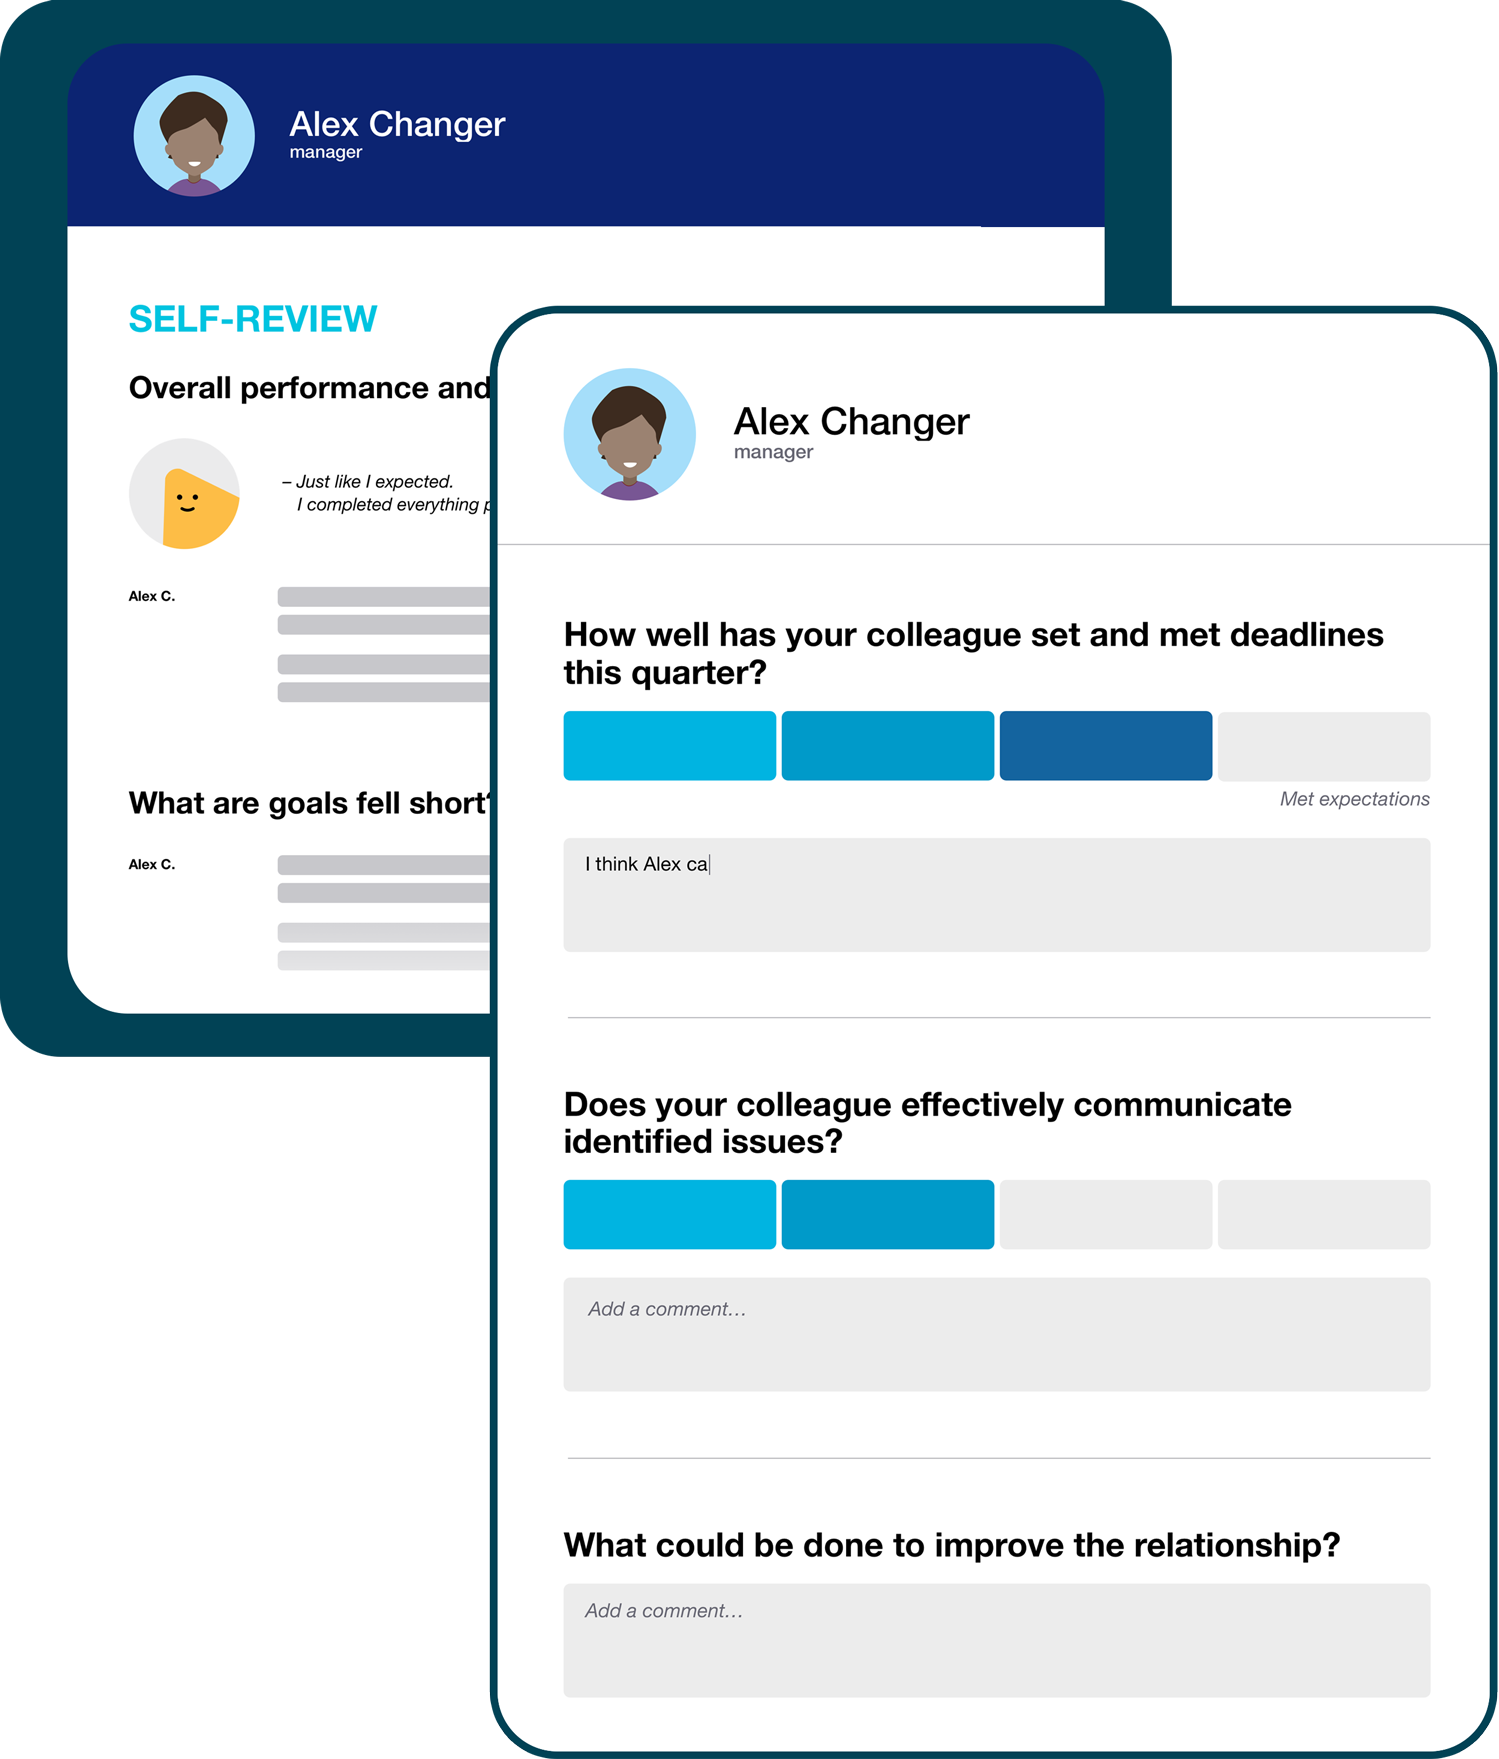 Performance review feedback tool